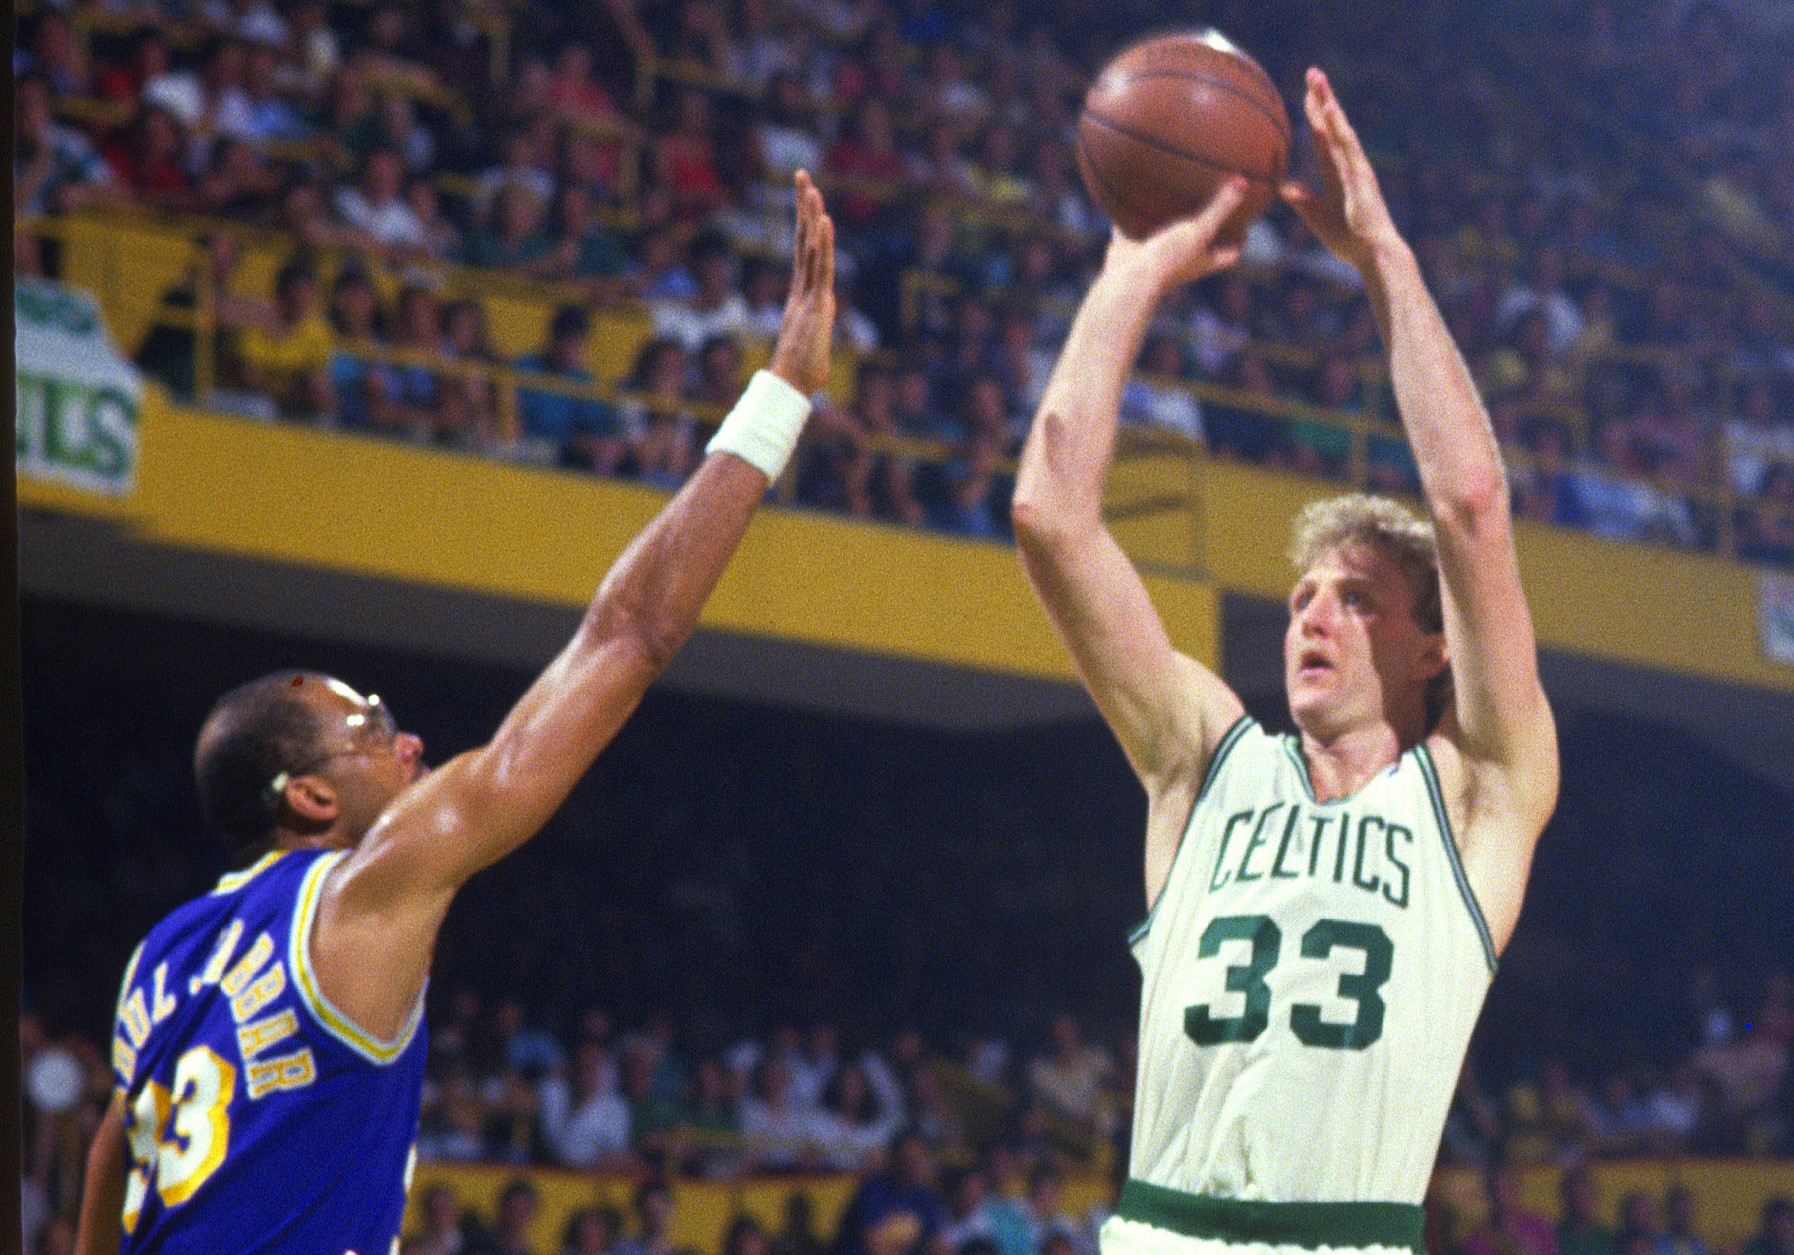 Boston Celtics vs. LA Lakers By the (Jersey) Numbers: Who Wore No. 33 Better, Larry Bird or Kareem Abdul-Jabbar?